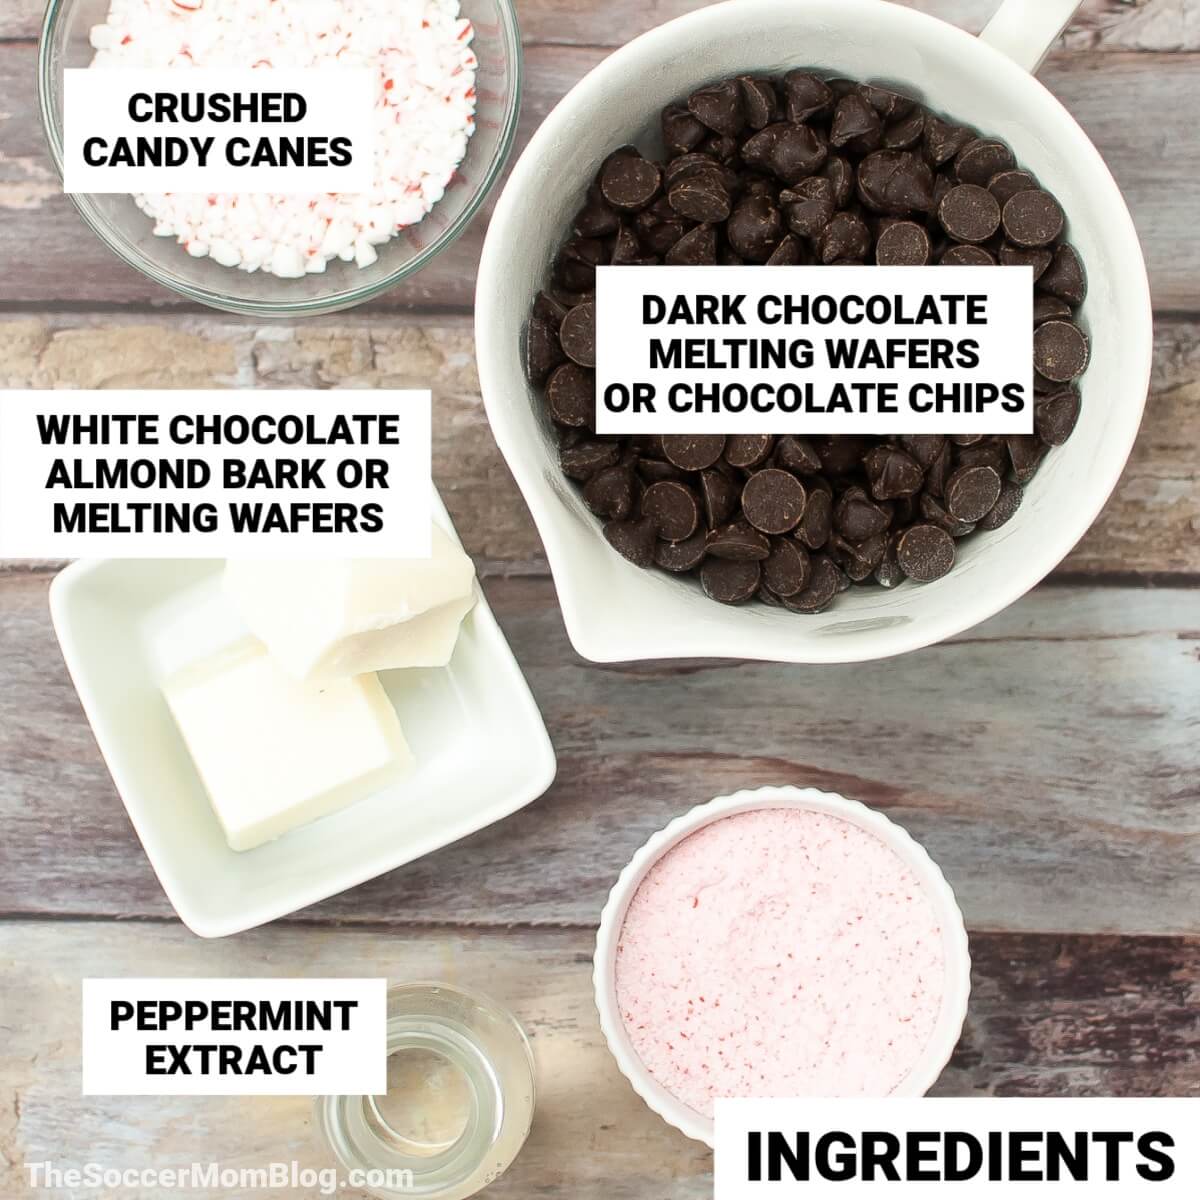 peppermint bark ingredients with text: crushed candy canes, white chocolate, dark chocolate, peppermint extract.